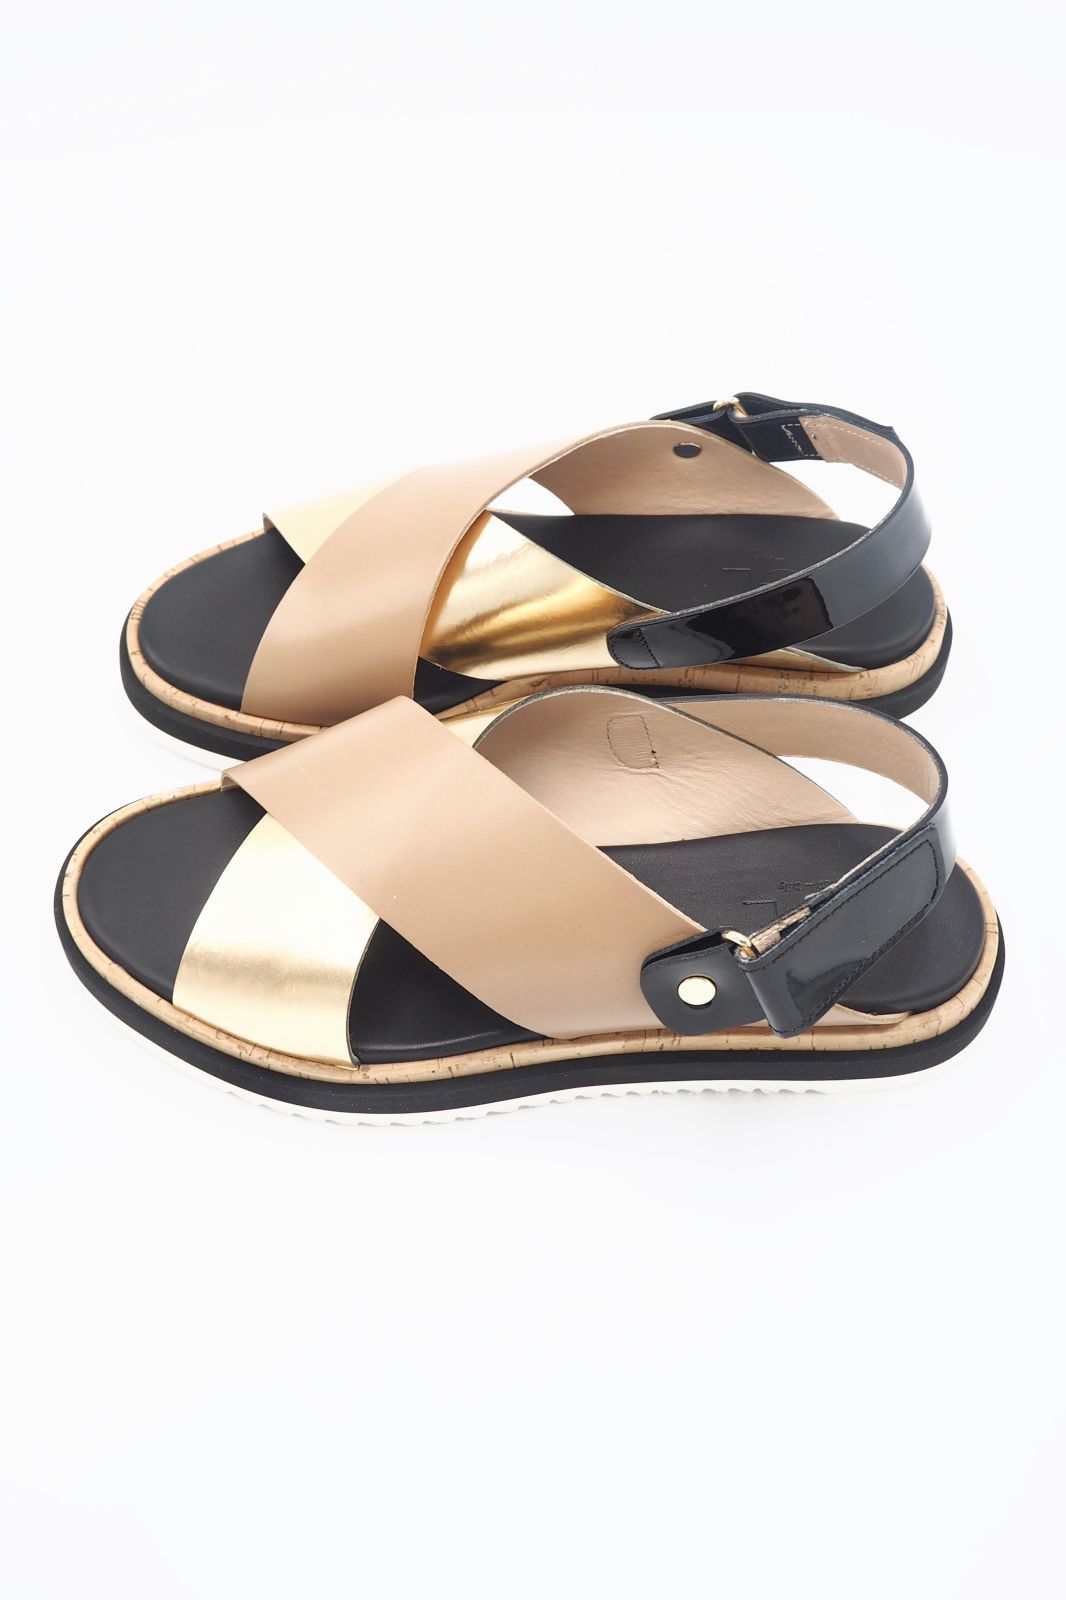 AGL sandale Naturel femmes (AGL-Sand X - 64203 Sand GS X or/camel) - Marine | Much more than shoes